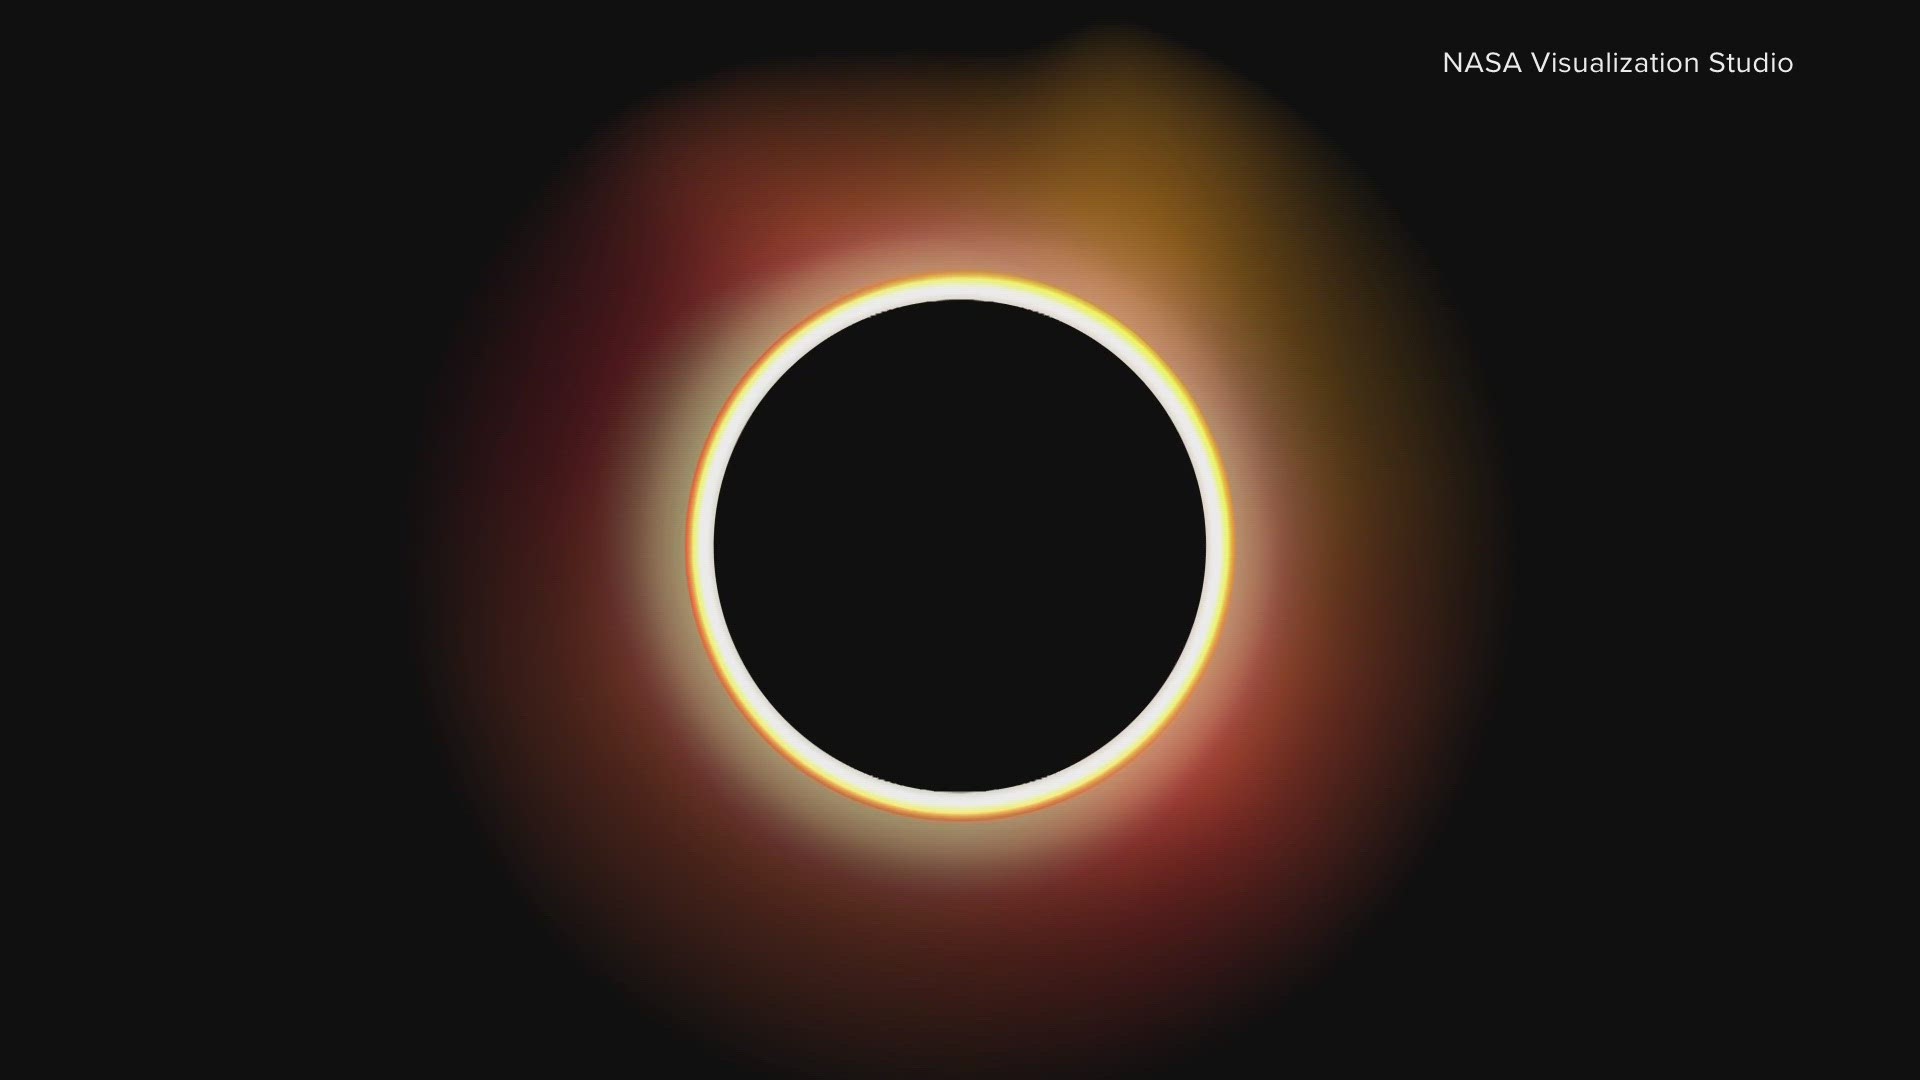 On Oct. 14, an annular "ring of fire" eclipse will stretch from Oregon to Texas.